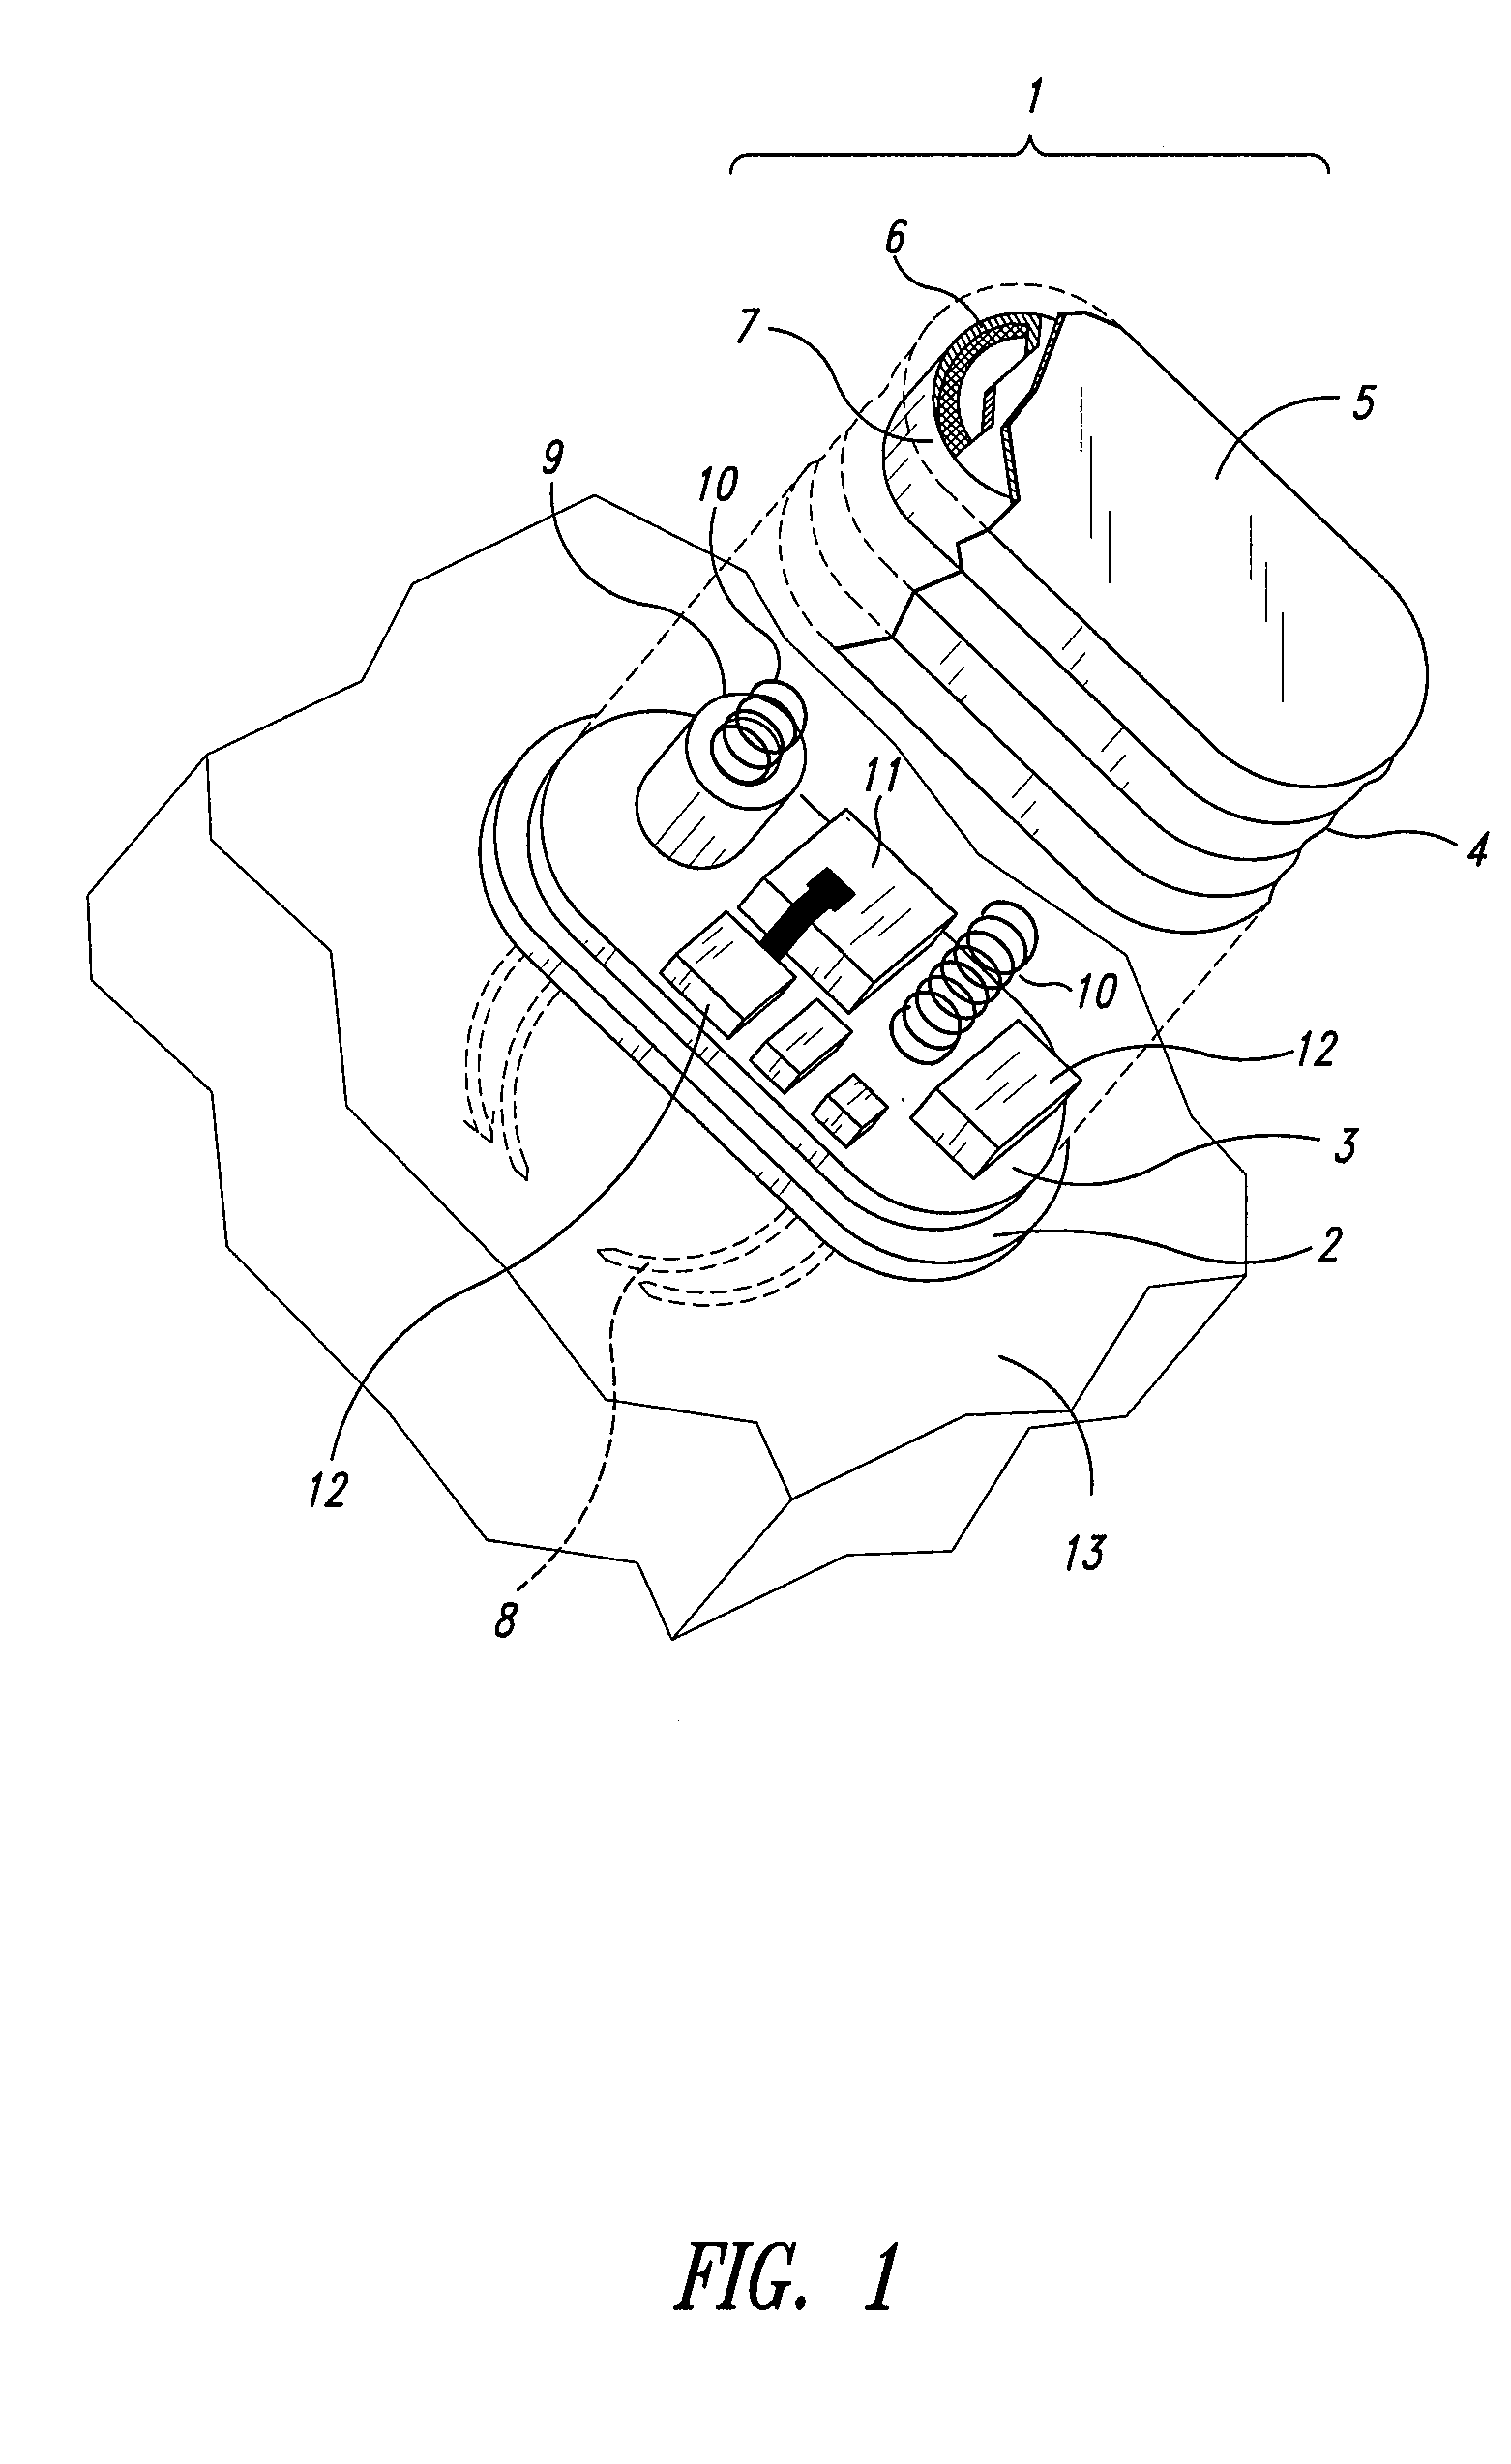 Self-powered leadless pacemaker